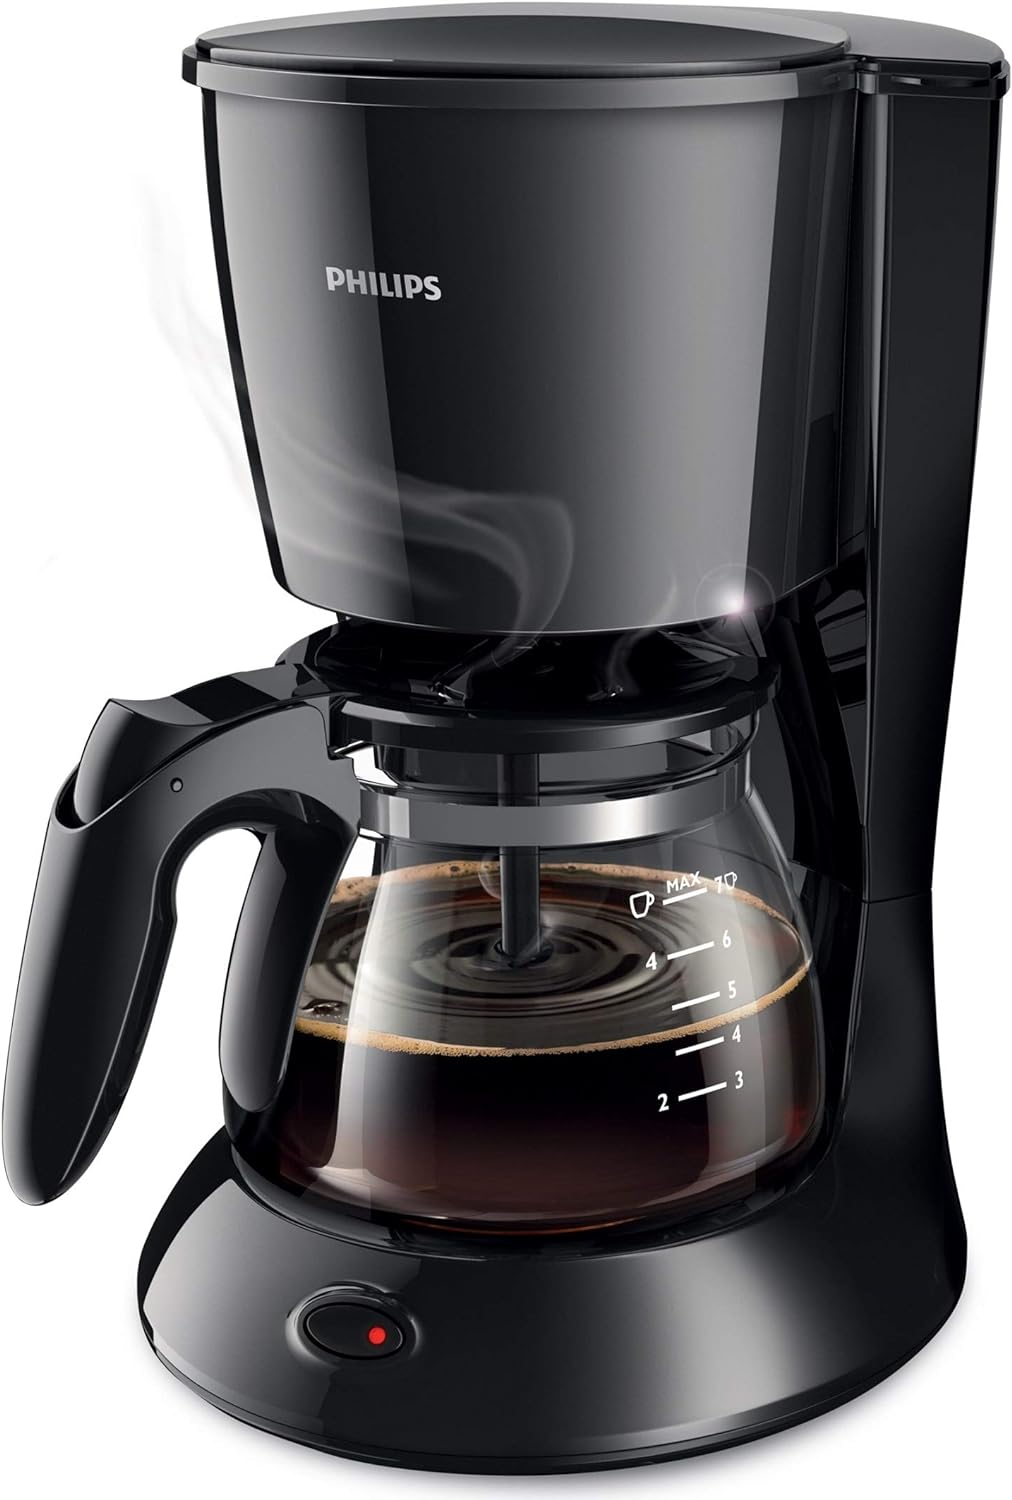 PHILIPS Coffee Maker 0.6 Litre Glass Jug for up to 7 cups - Automatic shut-off after 30 min - No Filter Included - ‎HD7432/20